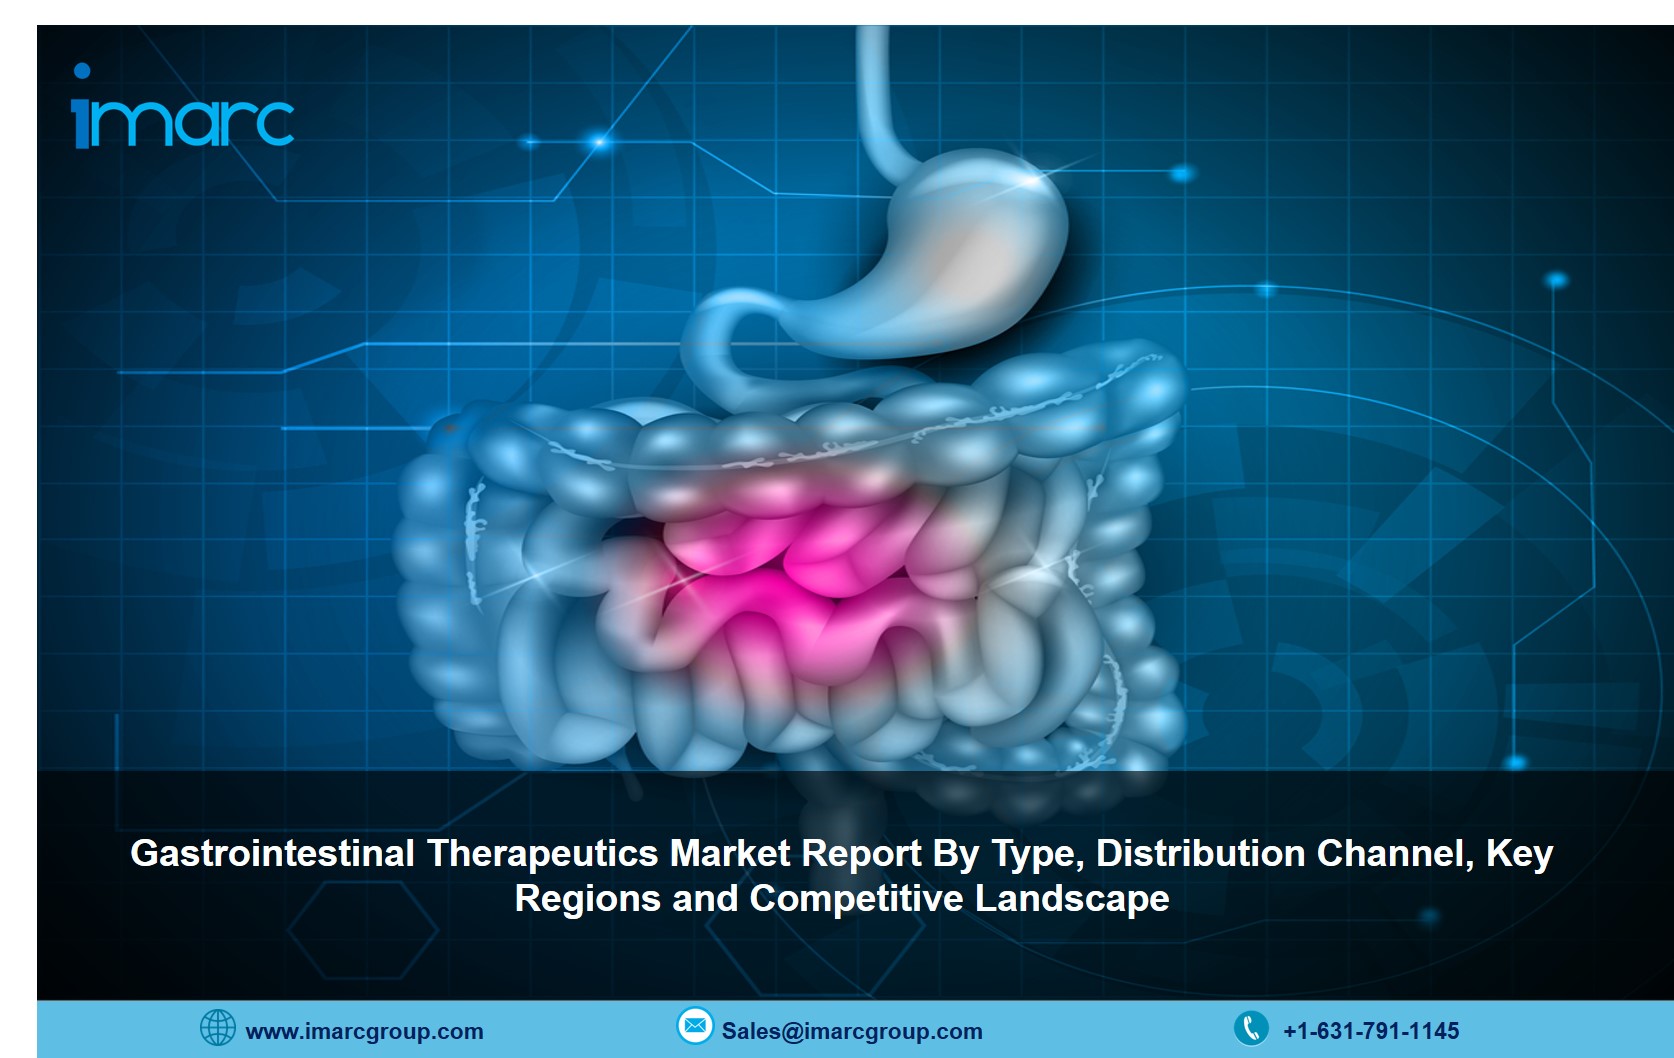 Gastrointestinal Therapeutics Market 2021-26: Size. Share, Price and Industry Trends